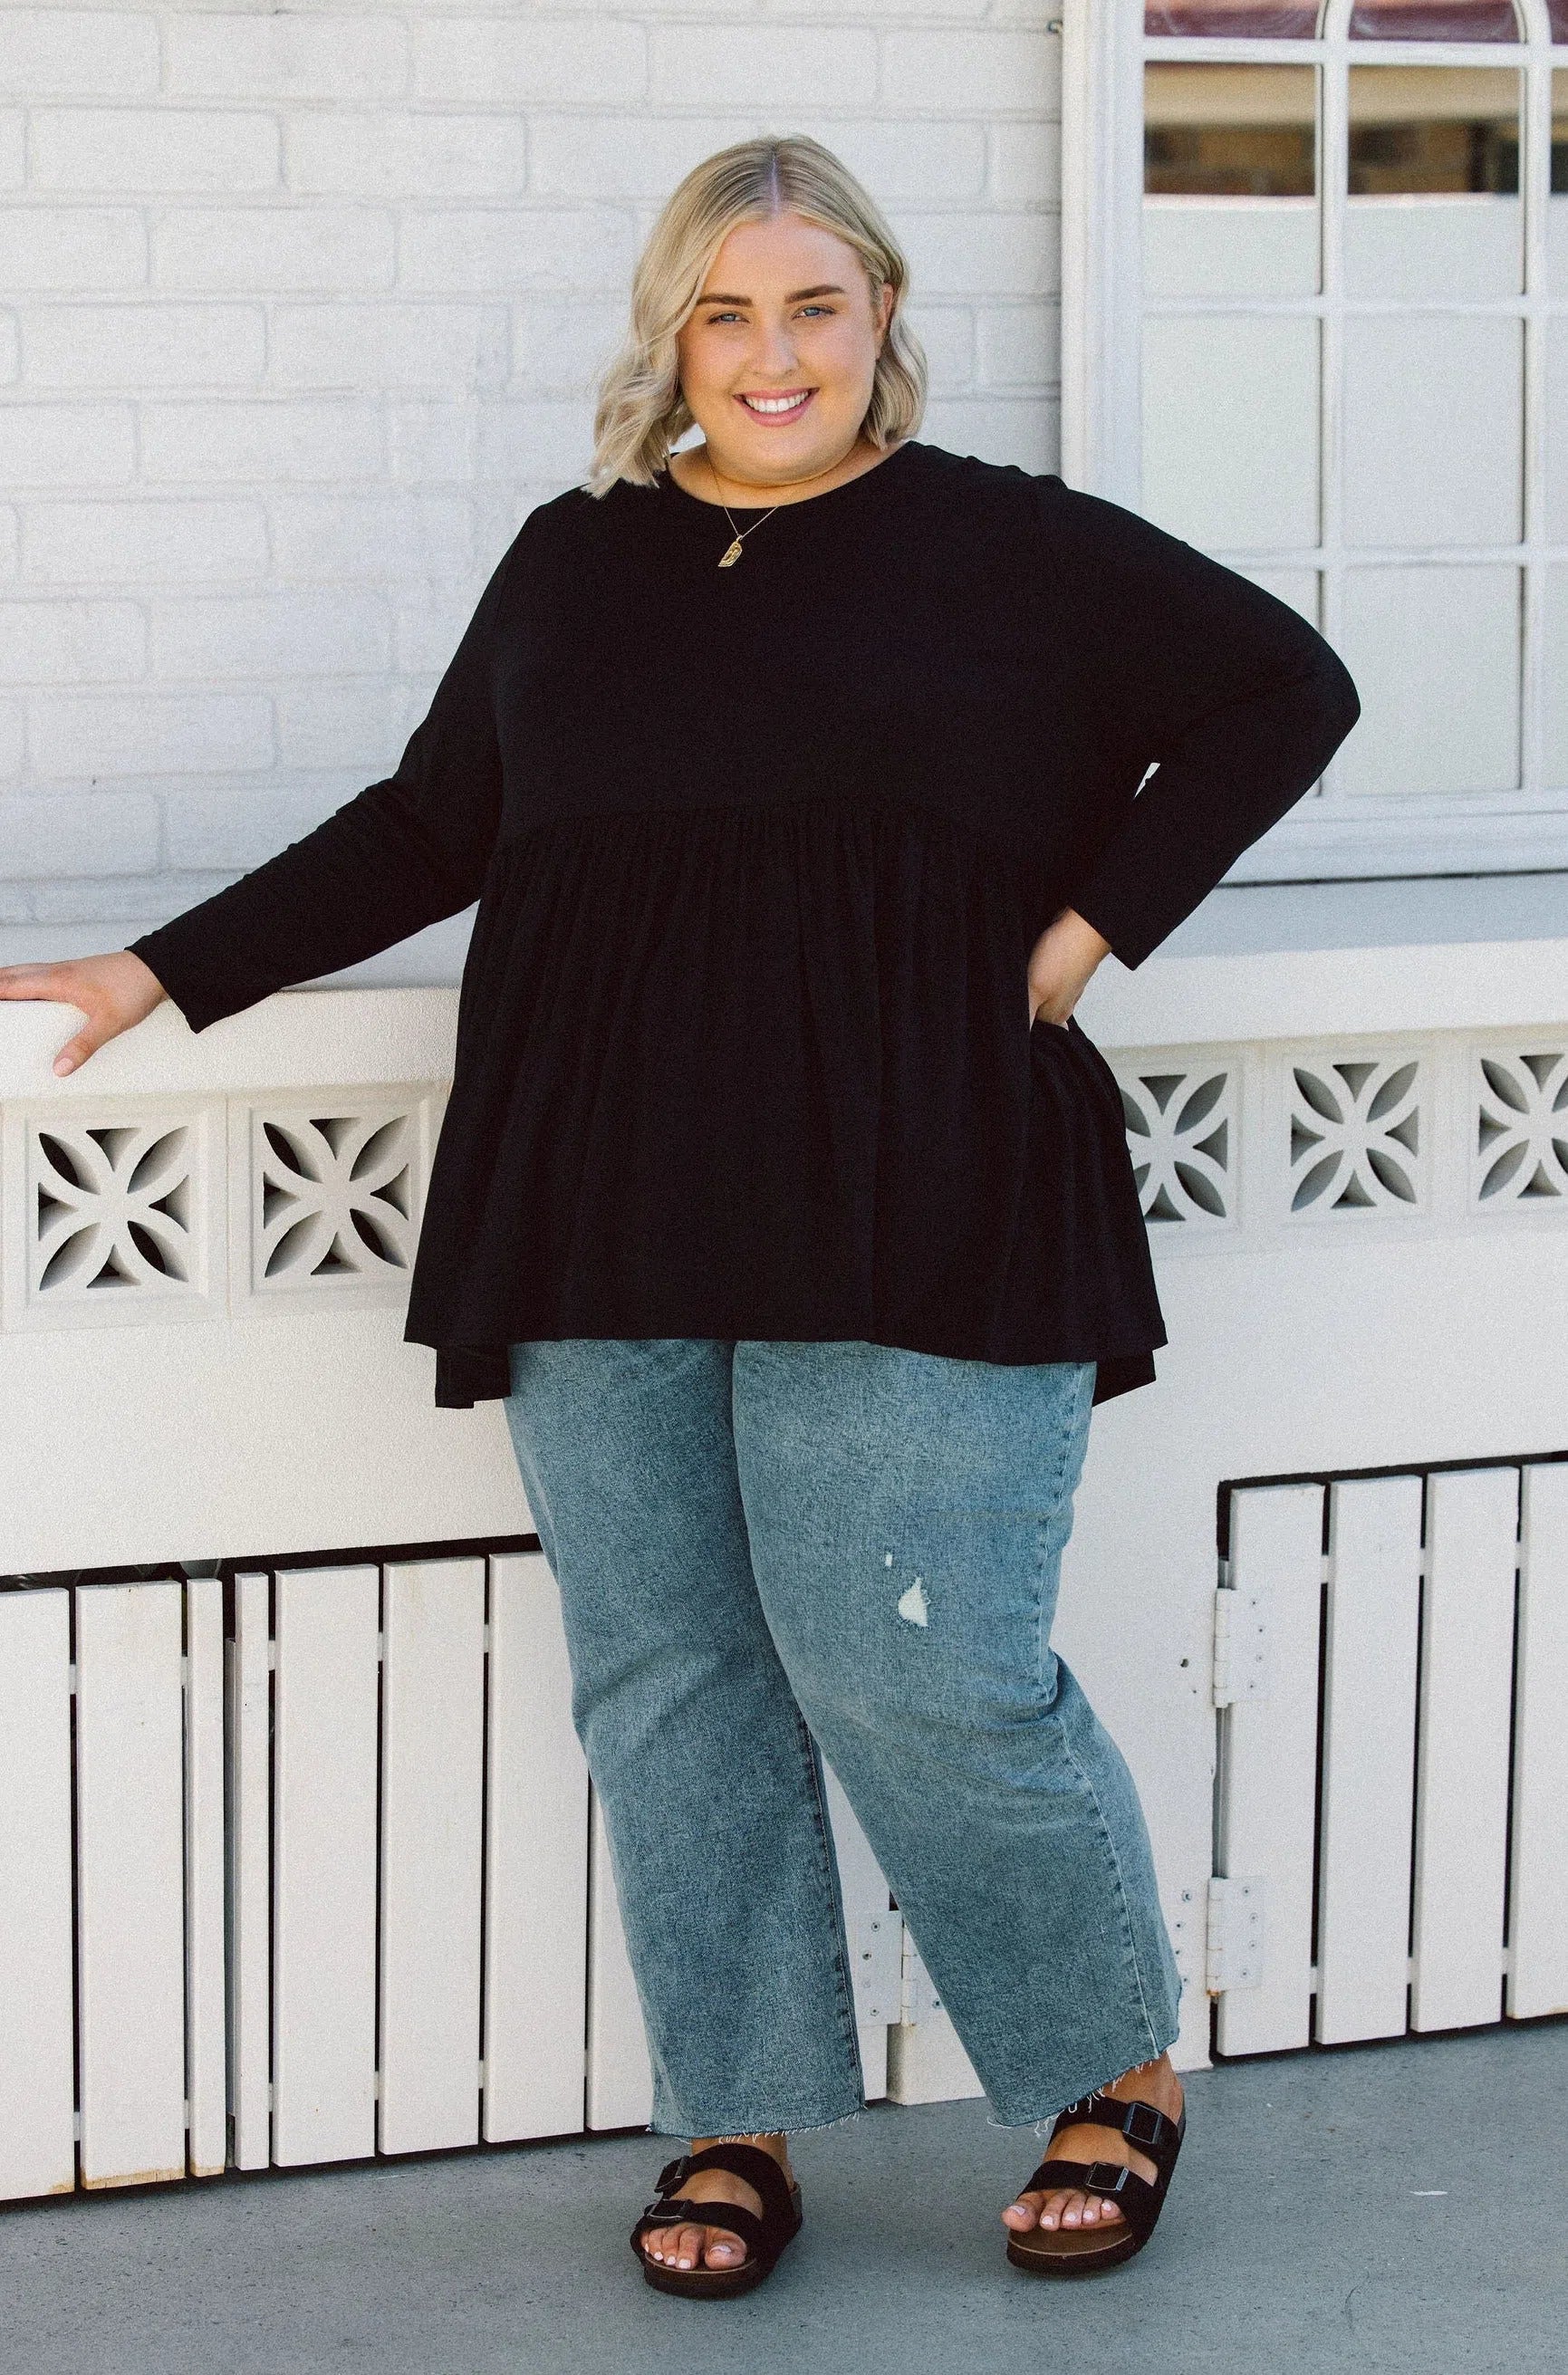 Plus Size clothing,  women modeling a black Womens Plus Size Tops, Lucy Long Sleeve Top in black